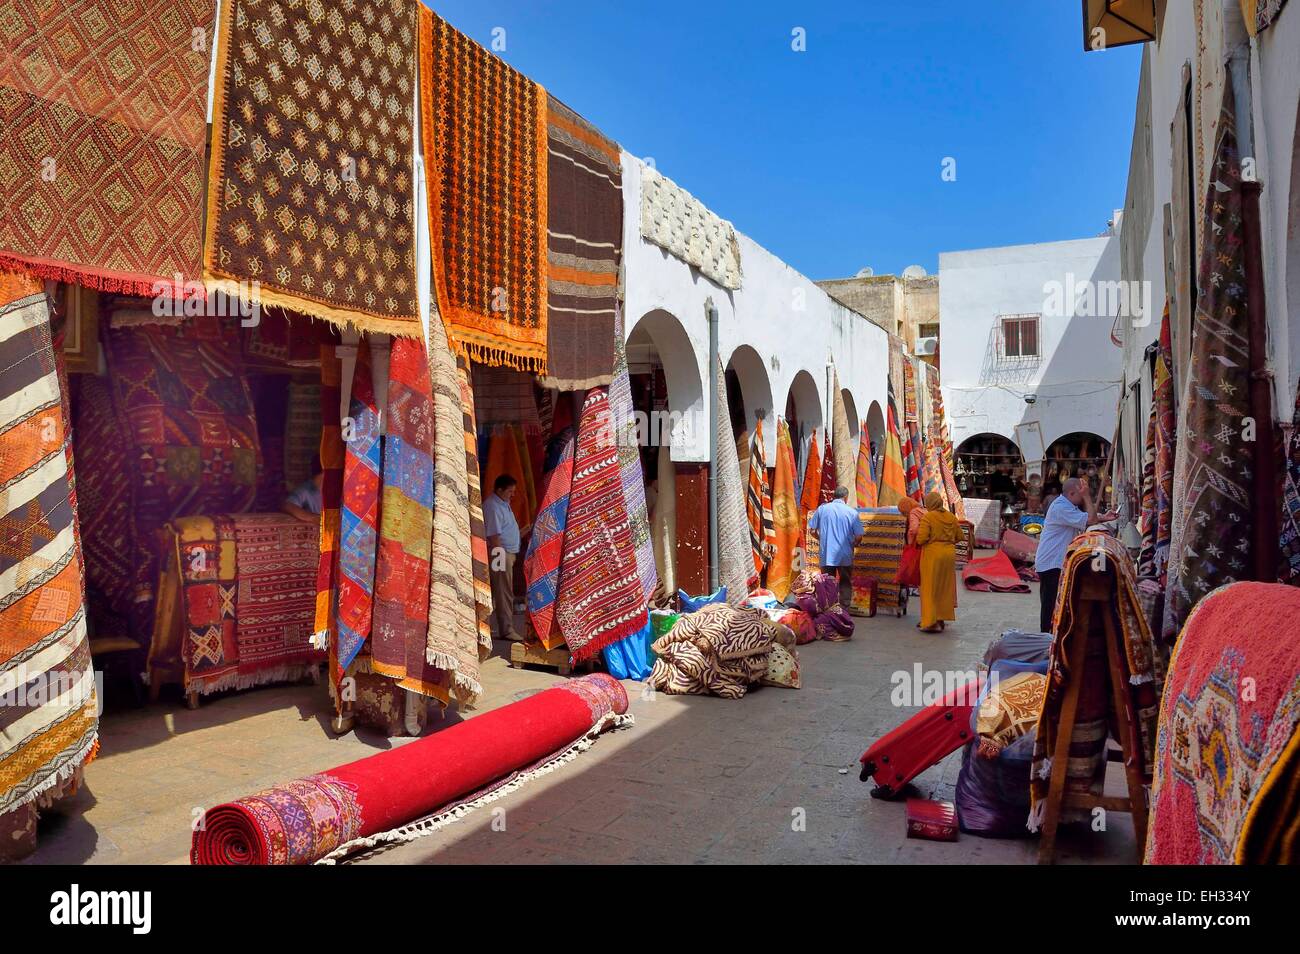 Morocco, Casablanca, Habous district built between 1917 and 1955 by architects Auguste Cadet and Edmond Brion, the carpet bazaar Stock Photo